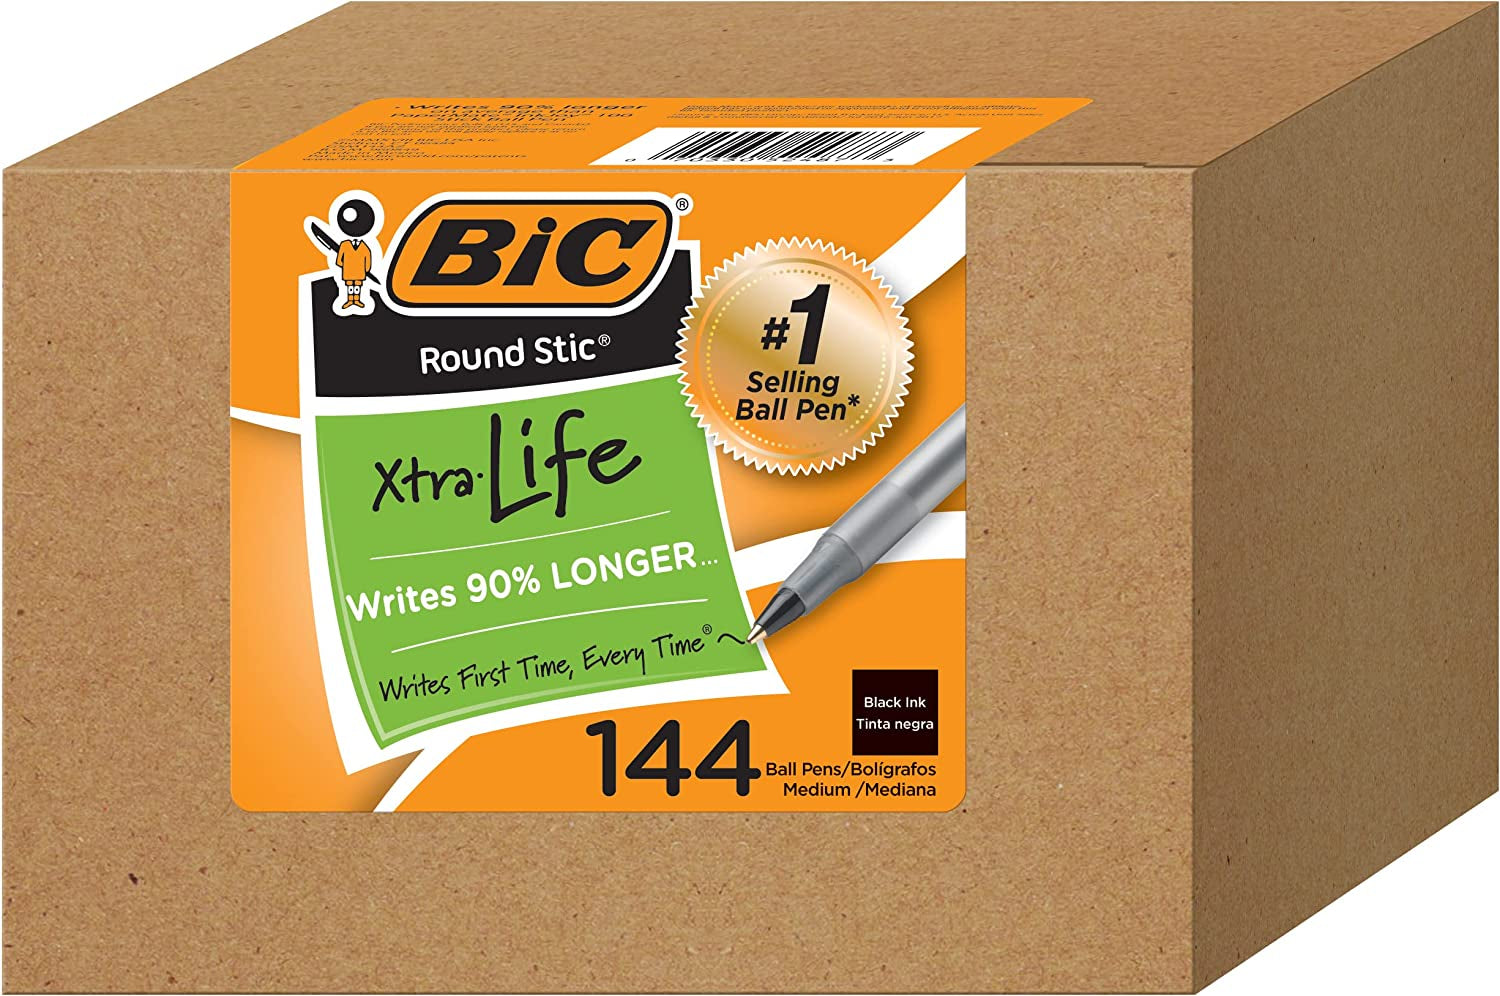 round Stic Xtra Life Ballpoint Ink Pens, Medium Point (1.0Mm), Black Pens, Flexible round Barrel for Writing Comfort, 144-Count